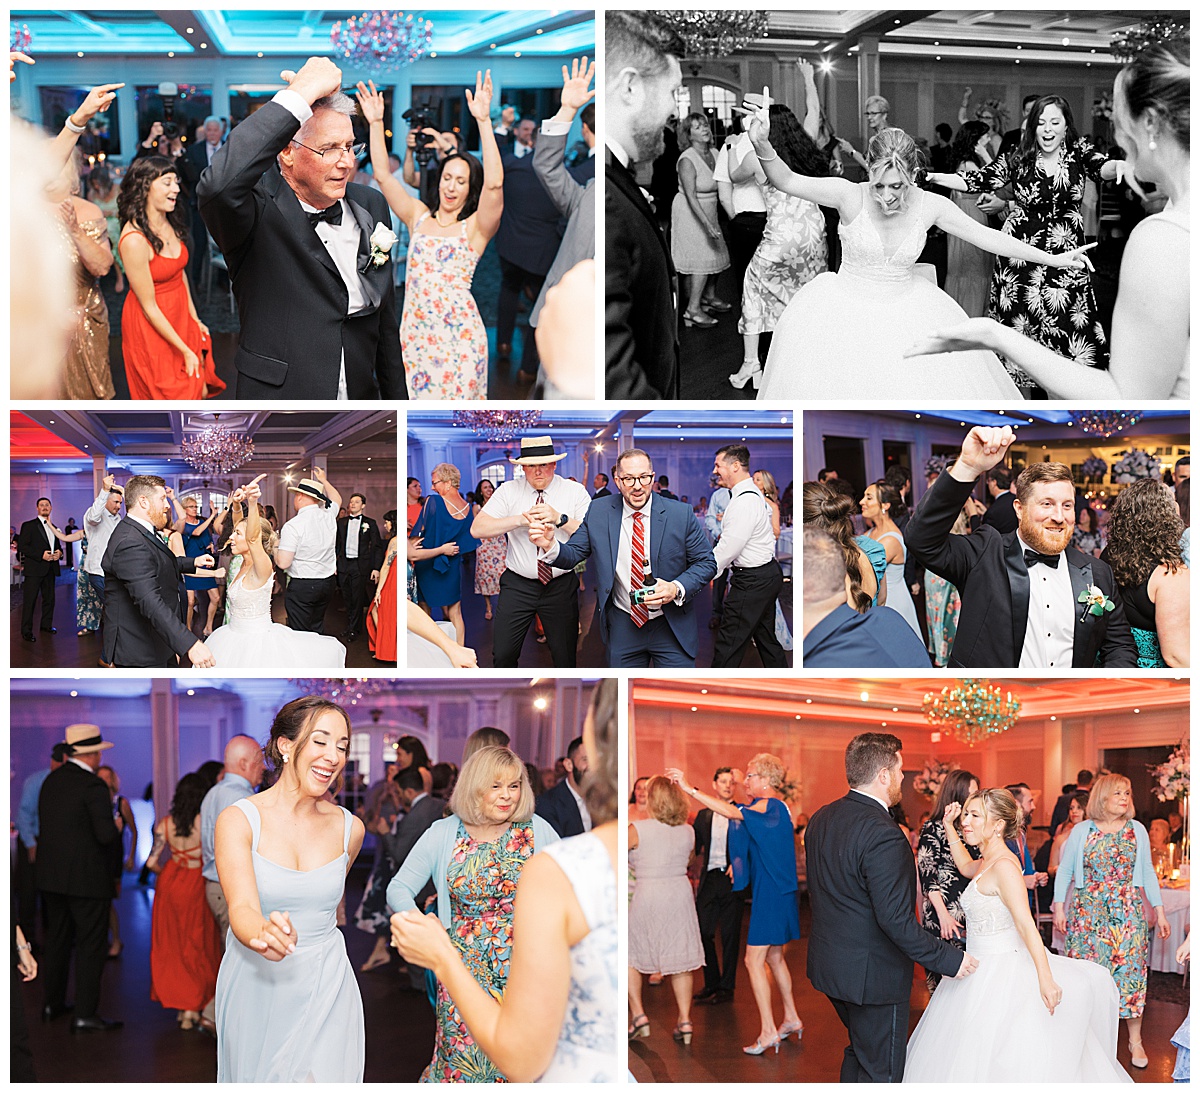 Candid fun dance floor moments for a wedding at The Mill.